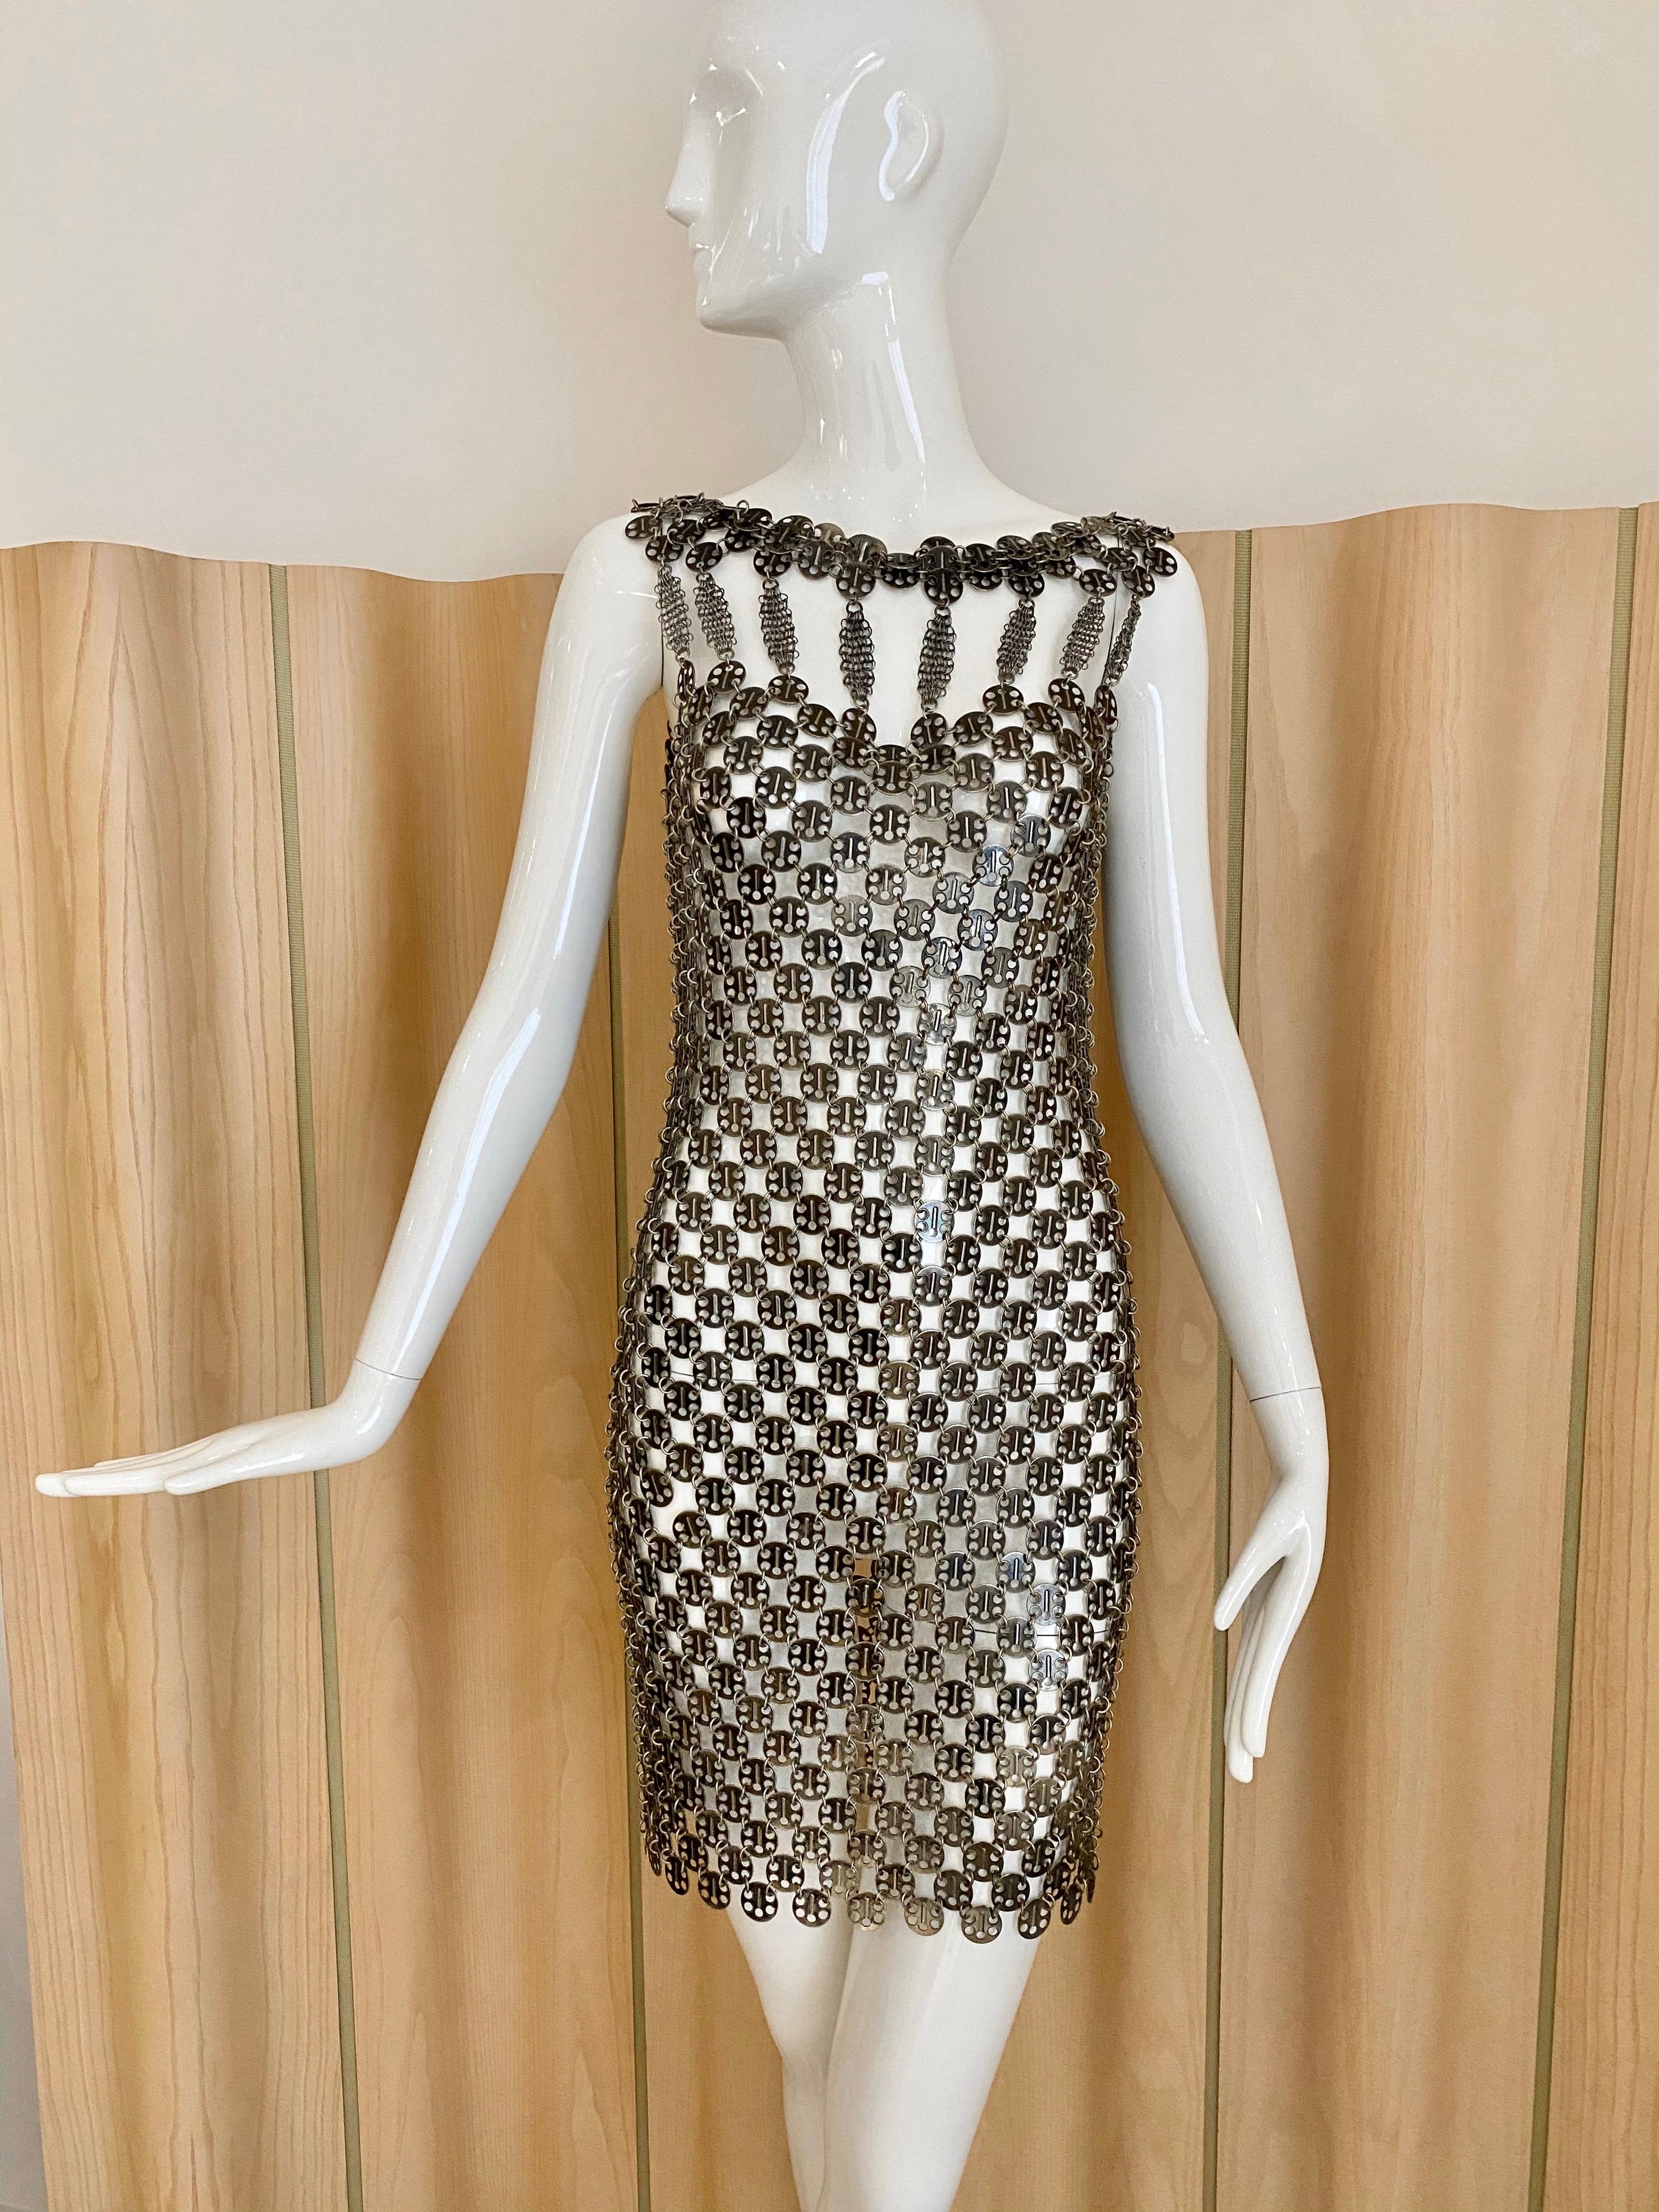 Rare Paco Rabanne Runway cocktail dress. 
Fit size 4
** Dress weigh around 8lb